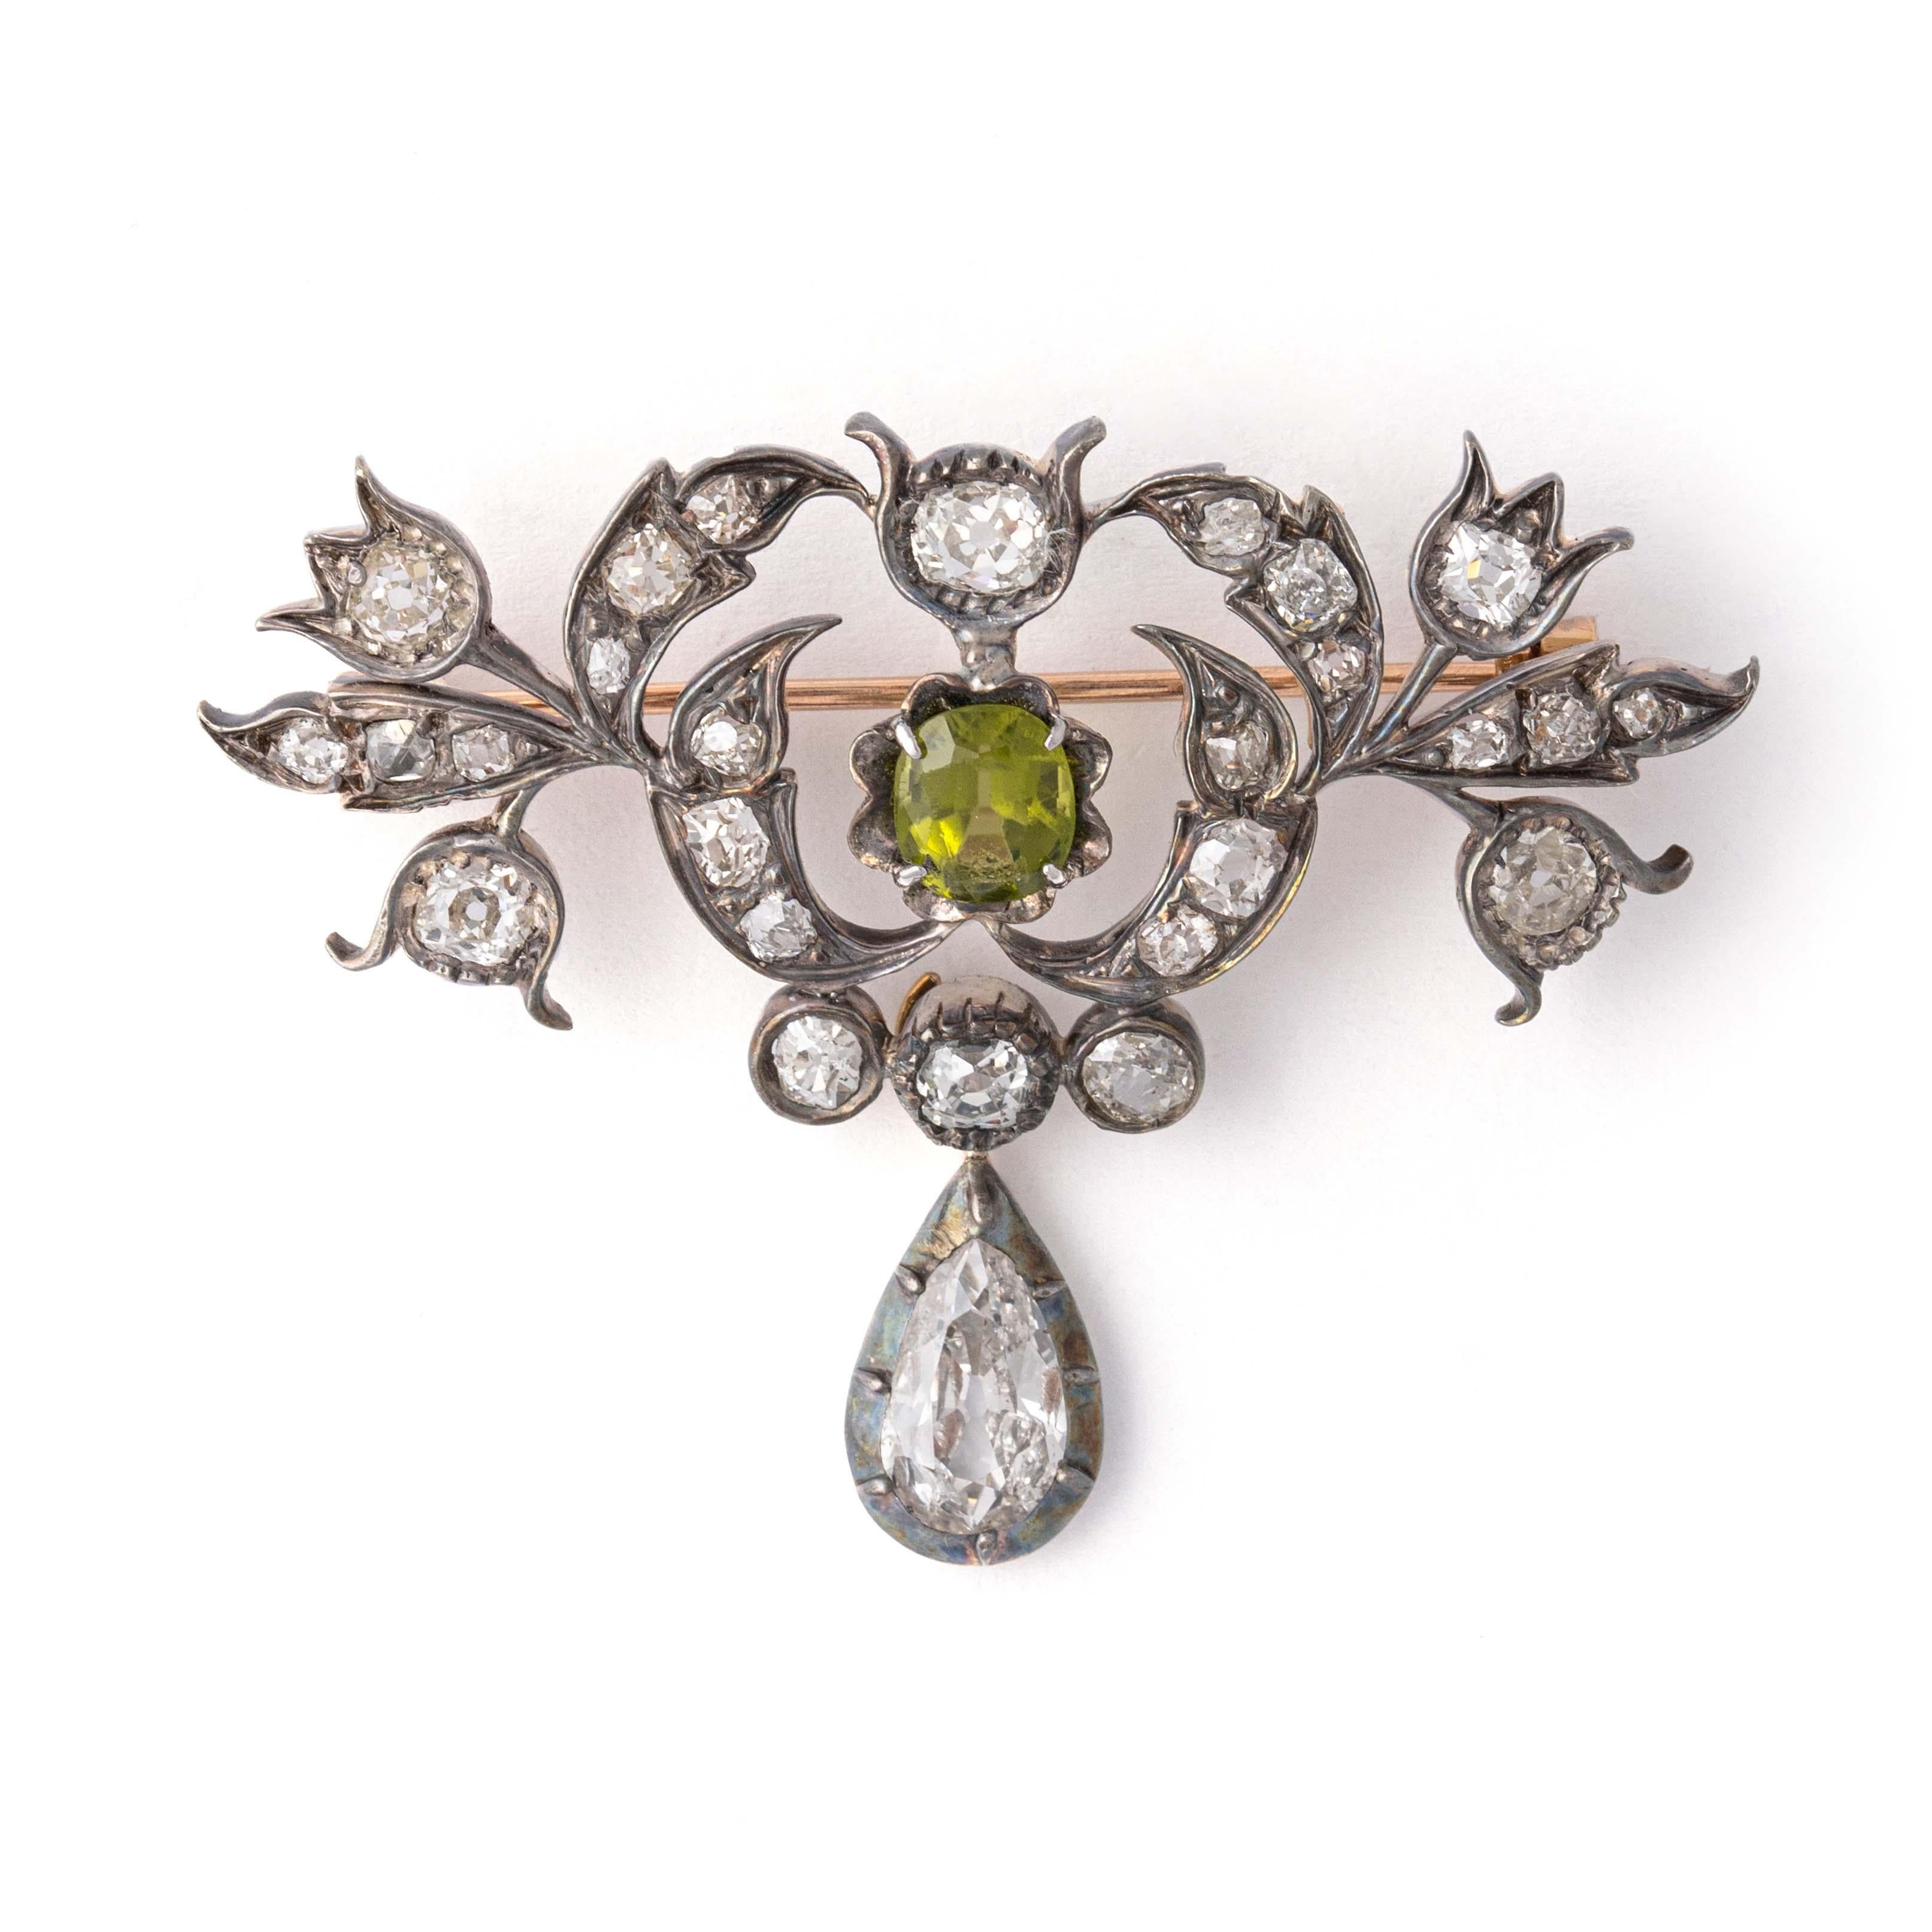 Antique Diamond and Peridot Brooch Pendant Late 19th Century For Sale 5